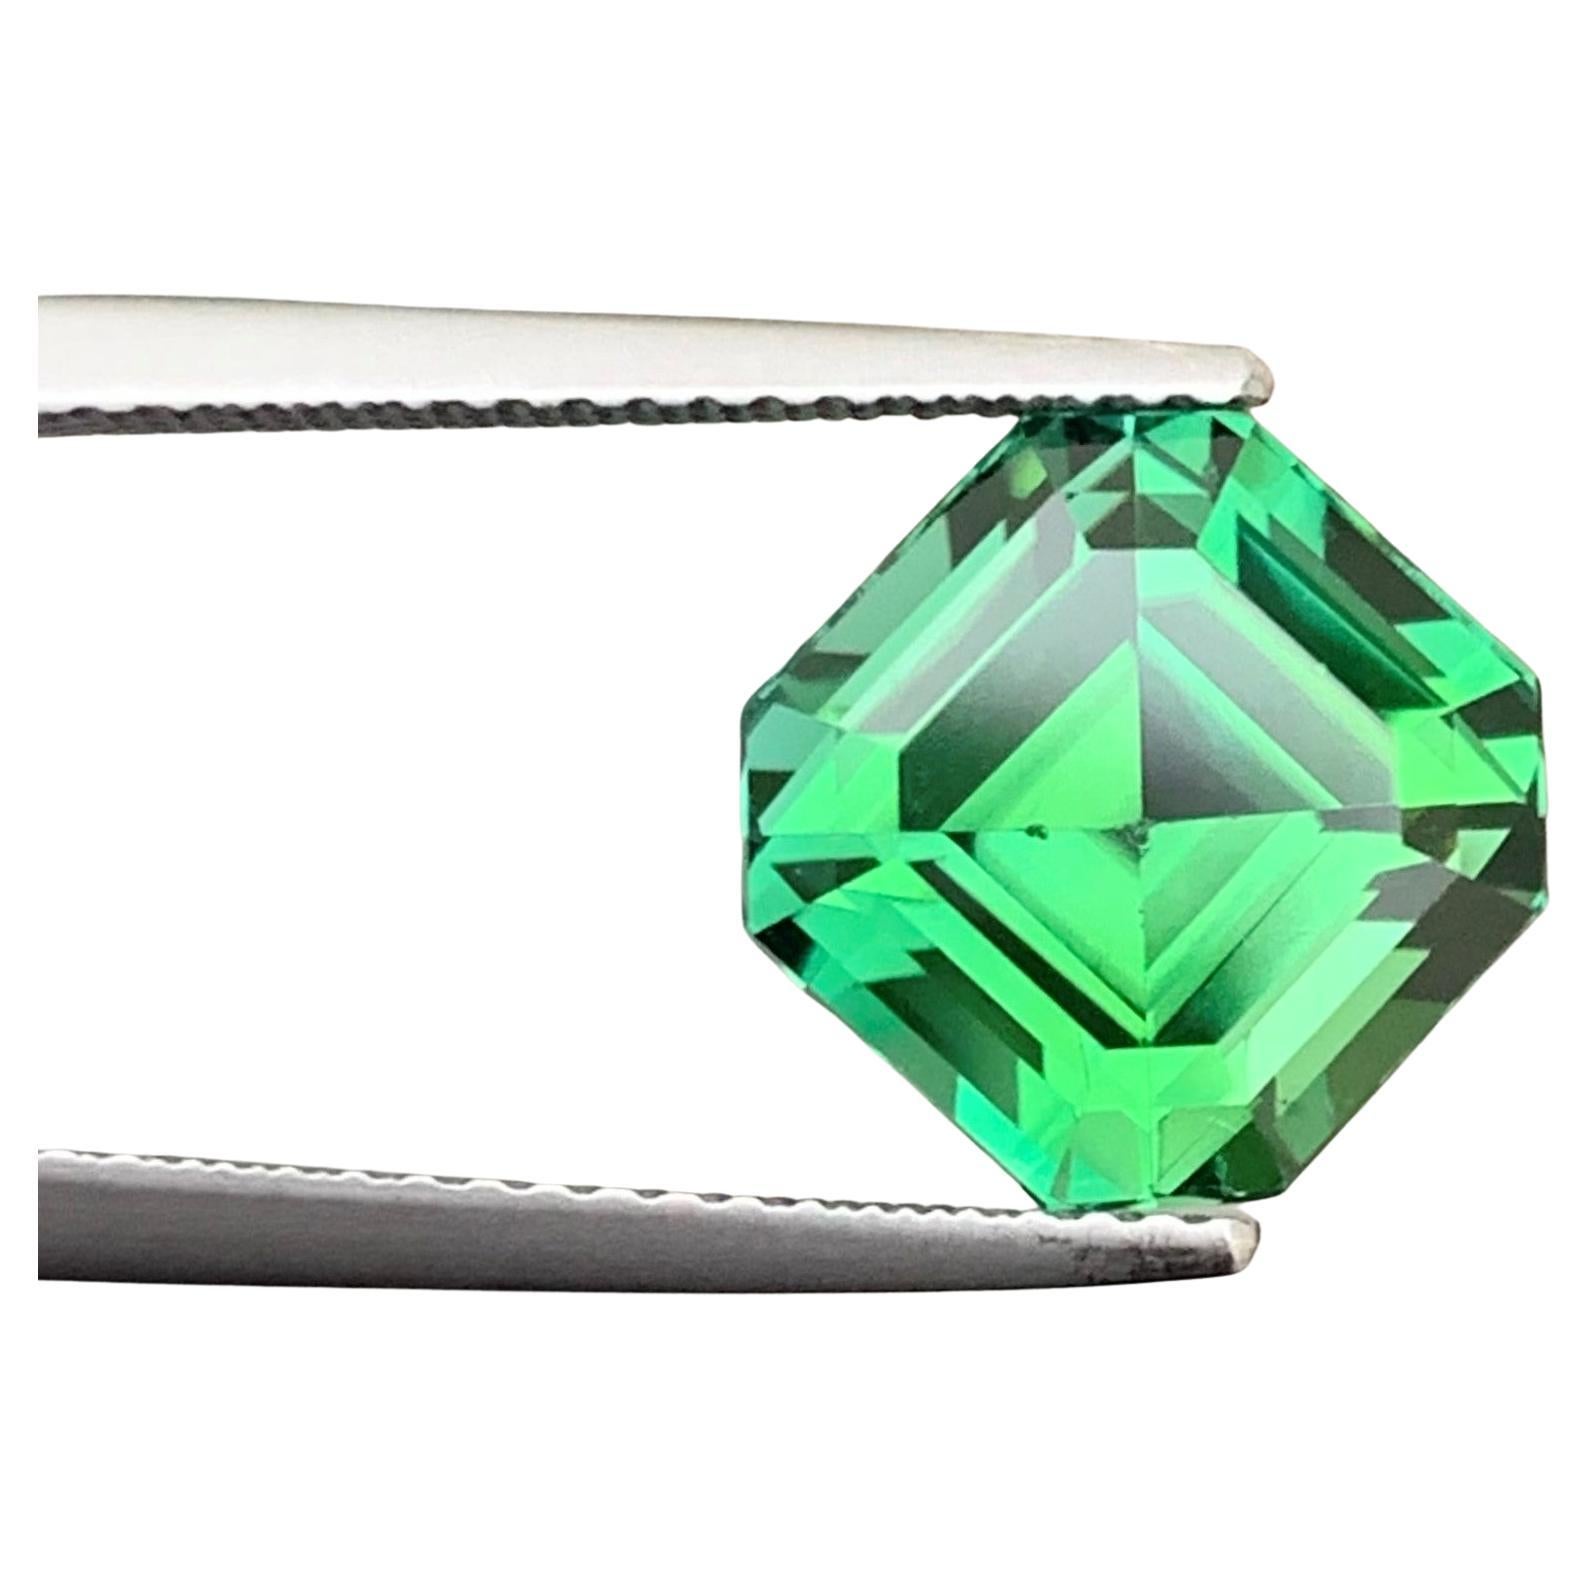 Gemstone Type : Tourmaline
Weight : 5.50 Carats
Dimensions : 9.9x9.8x7.7 Mm
Origin : Kunar Afghanistan
Clarity : Eye Clean
Shape: Asscher
Color: Blueish Green
Certificate: On Demand
Basically, mint tourmalines are tourmalines with pastel hues of